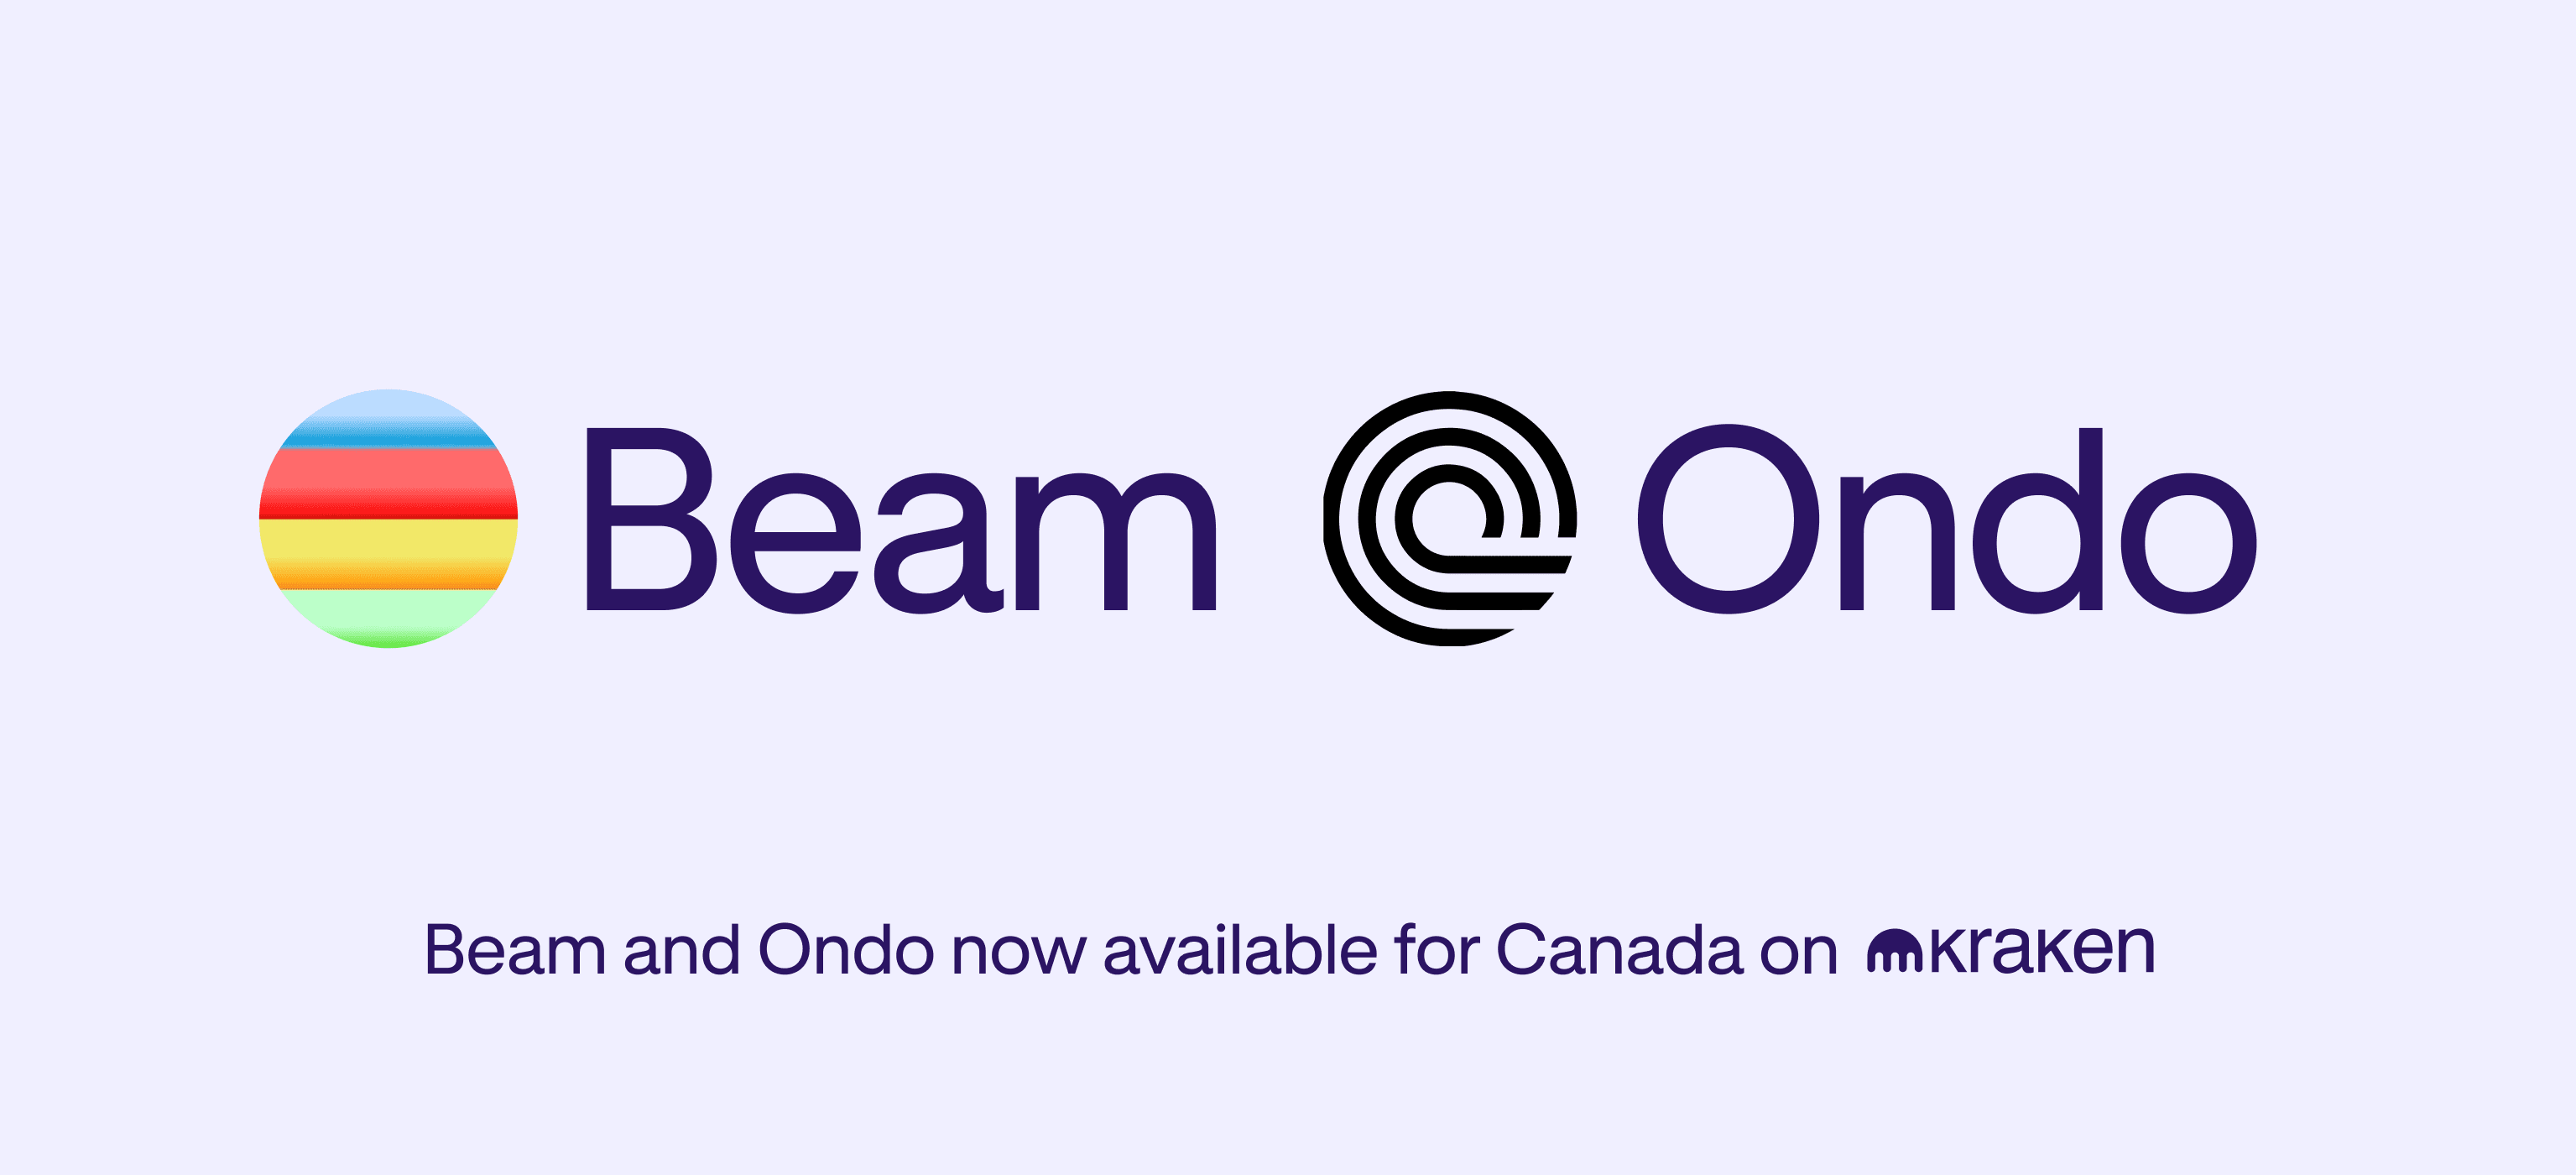 Trading for Beam (BEAM) and Ondo (ONDO) starts now in Canada